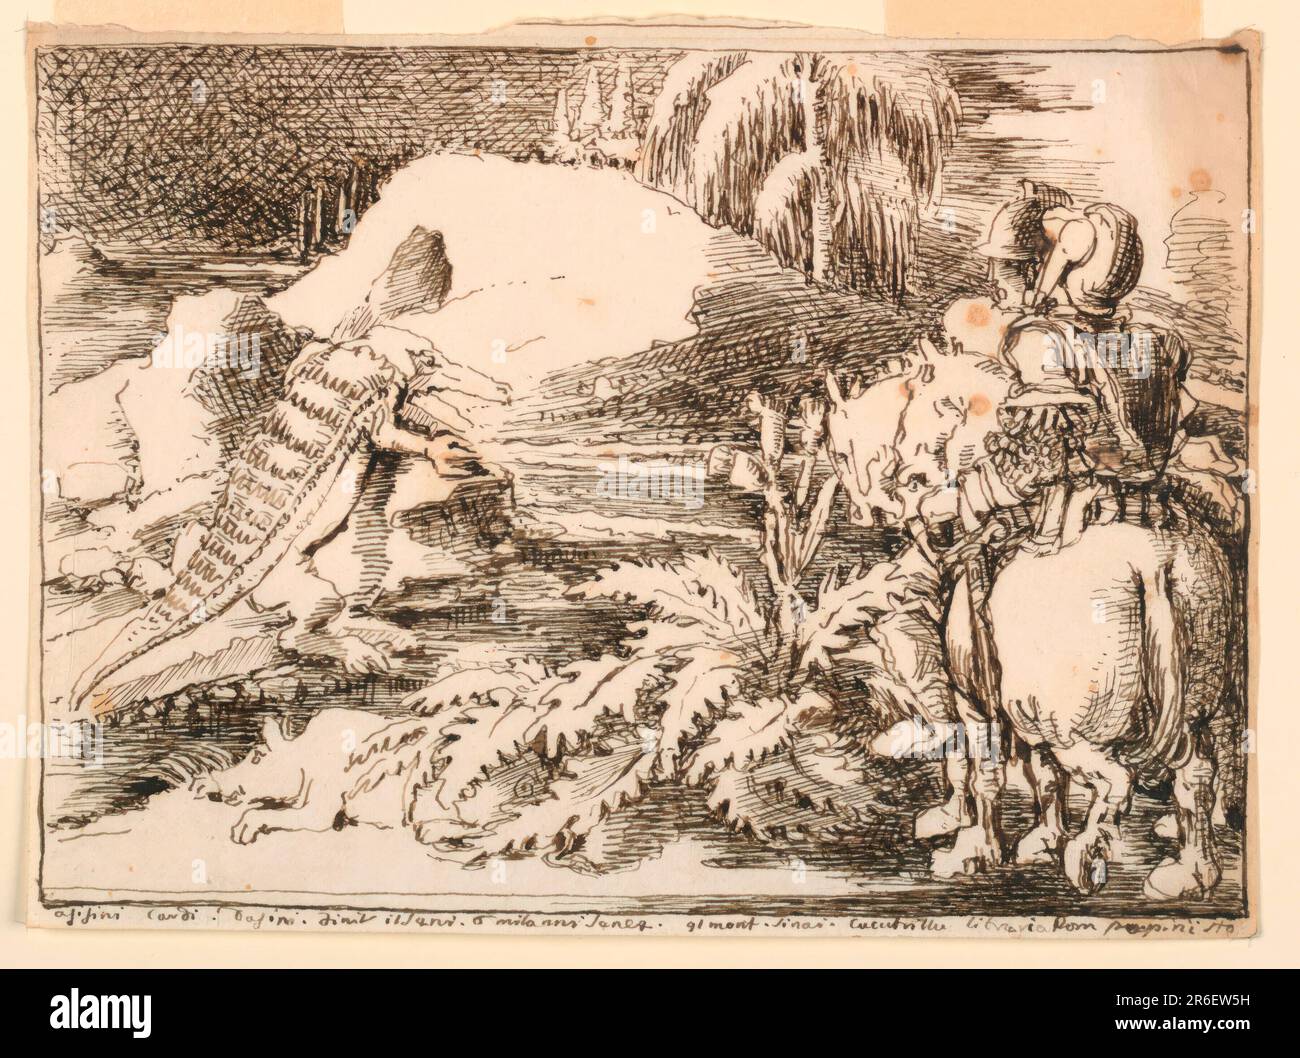 Two knights in armor riding horses in right foreground confront a beast standing in left middle ground. Beast resembles crocodile. Background in a landscape with a hill in middle dominated by a tree. Ink border. Date: 1820-1850. Pen and brown ink on white paper. Museum: Cooper Hewitt, Smithsonian Design Museum. Stock Photo